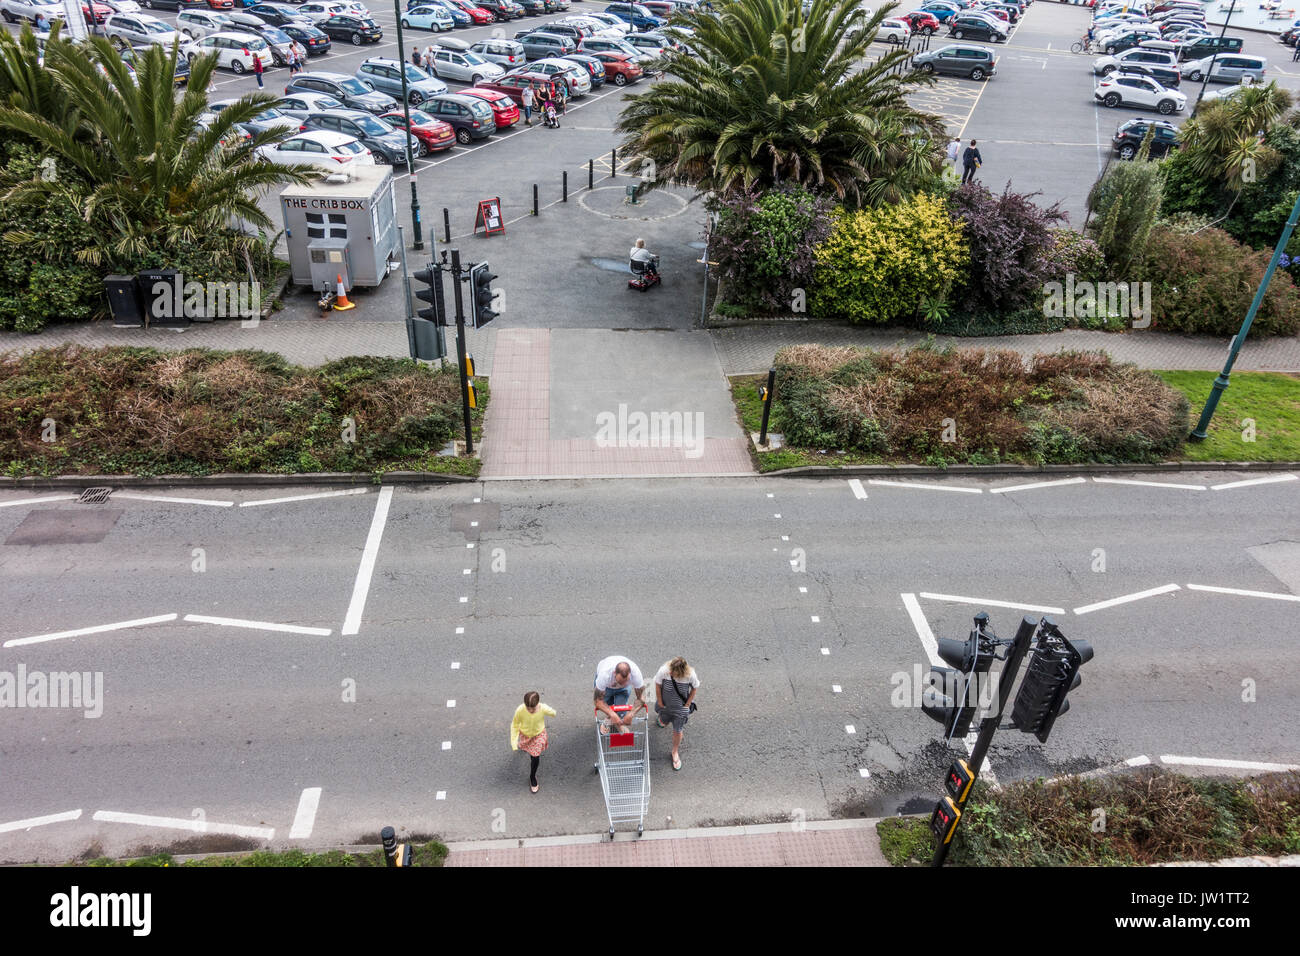 Family crossing the road at the lights from the car park, with dad pushing a shopping trolley to the facilities of Penzance, Cornwall, England, UK. Stock Photo